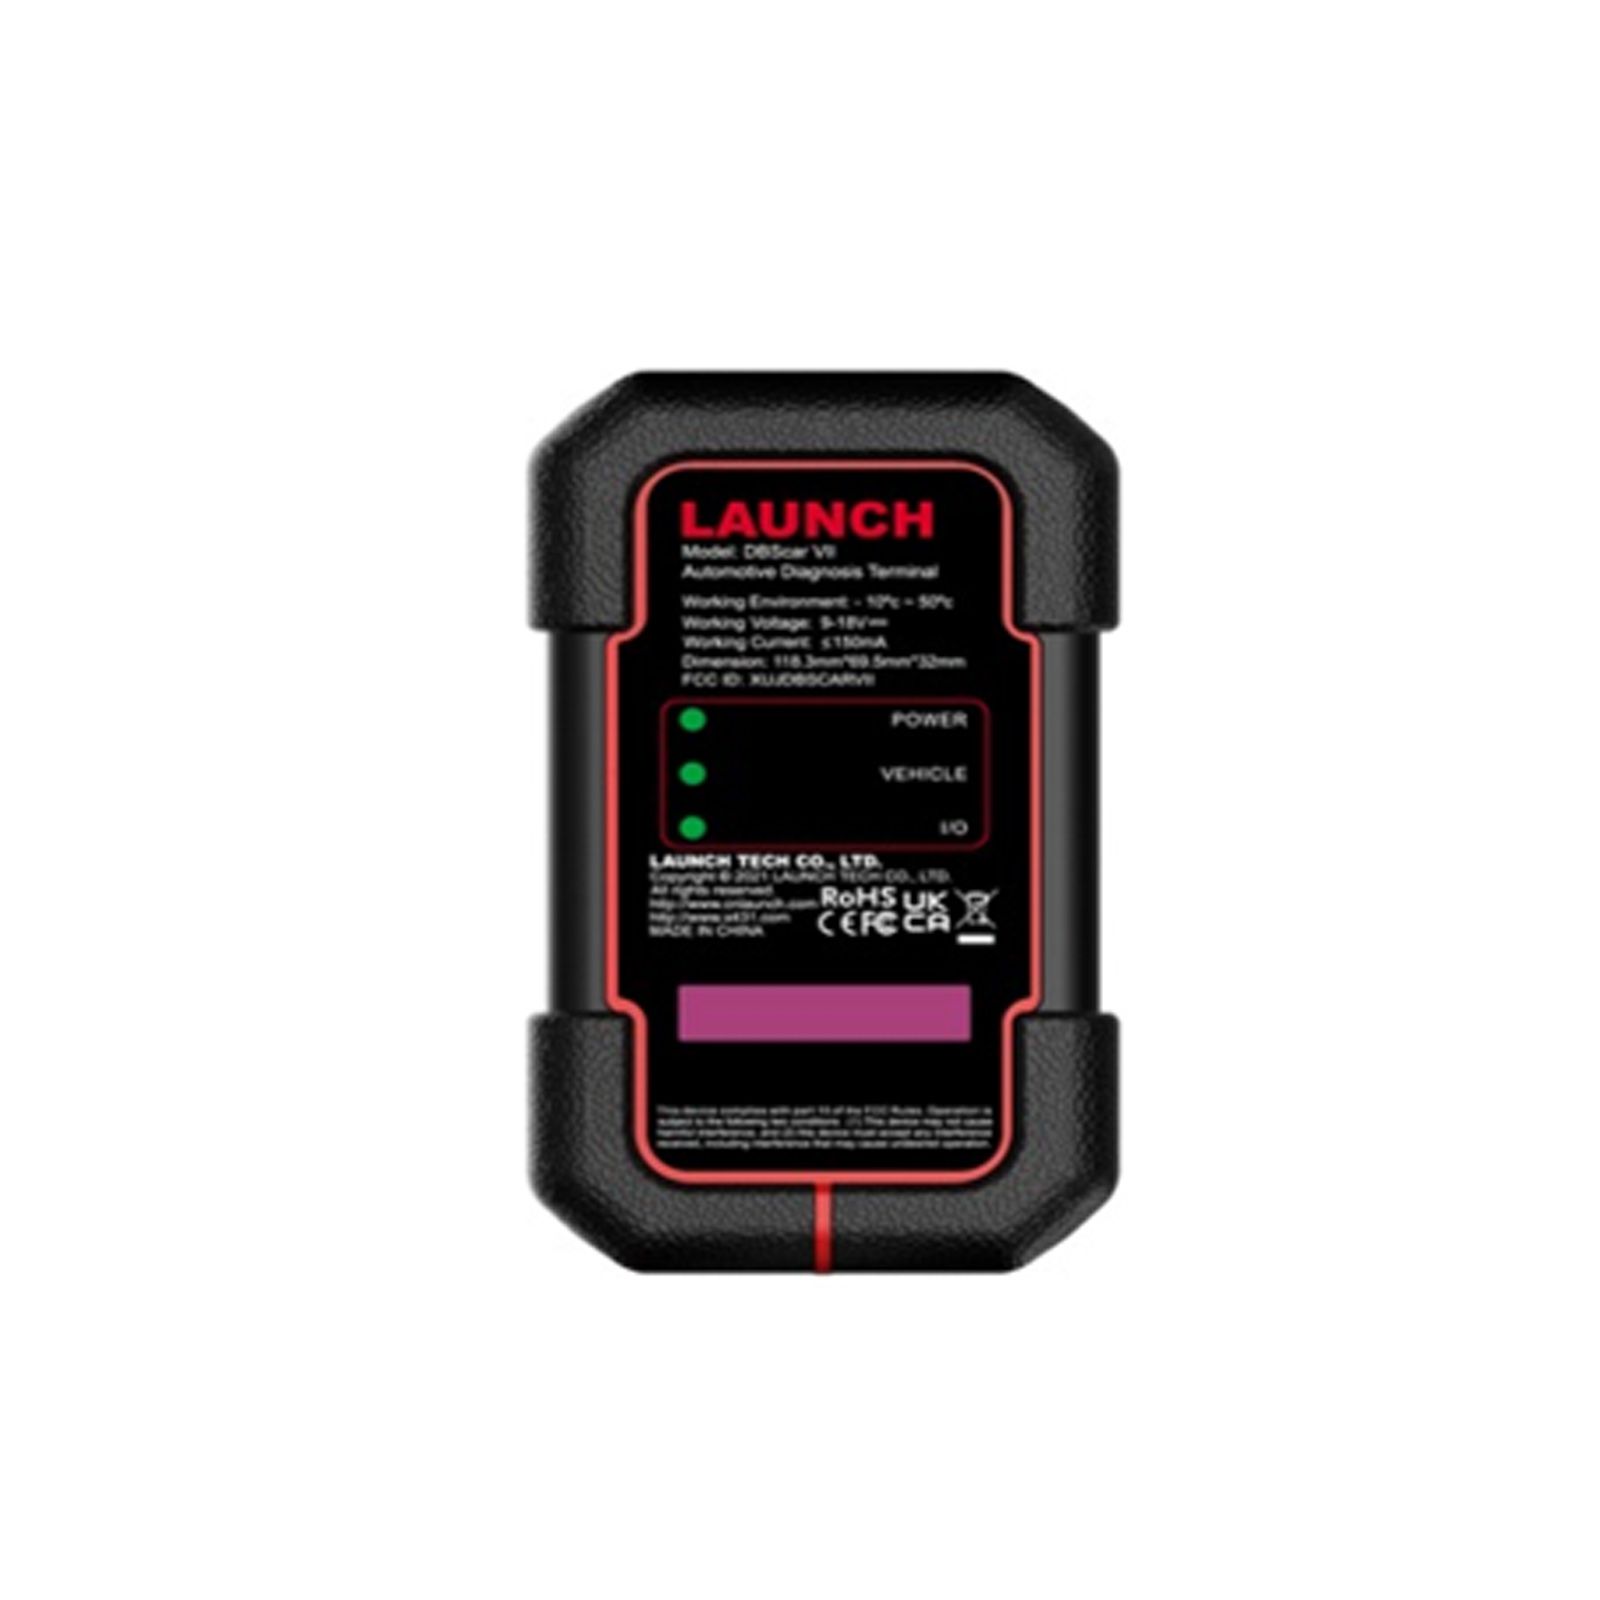 Newest Launch X-431 PRO PROS V5.0 Diagnostic Tool 37 Special Functions Intelligent Diagnose TPMS Supports CANFD and DOIP Global Version